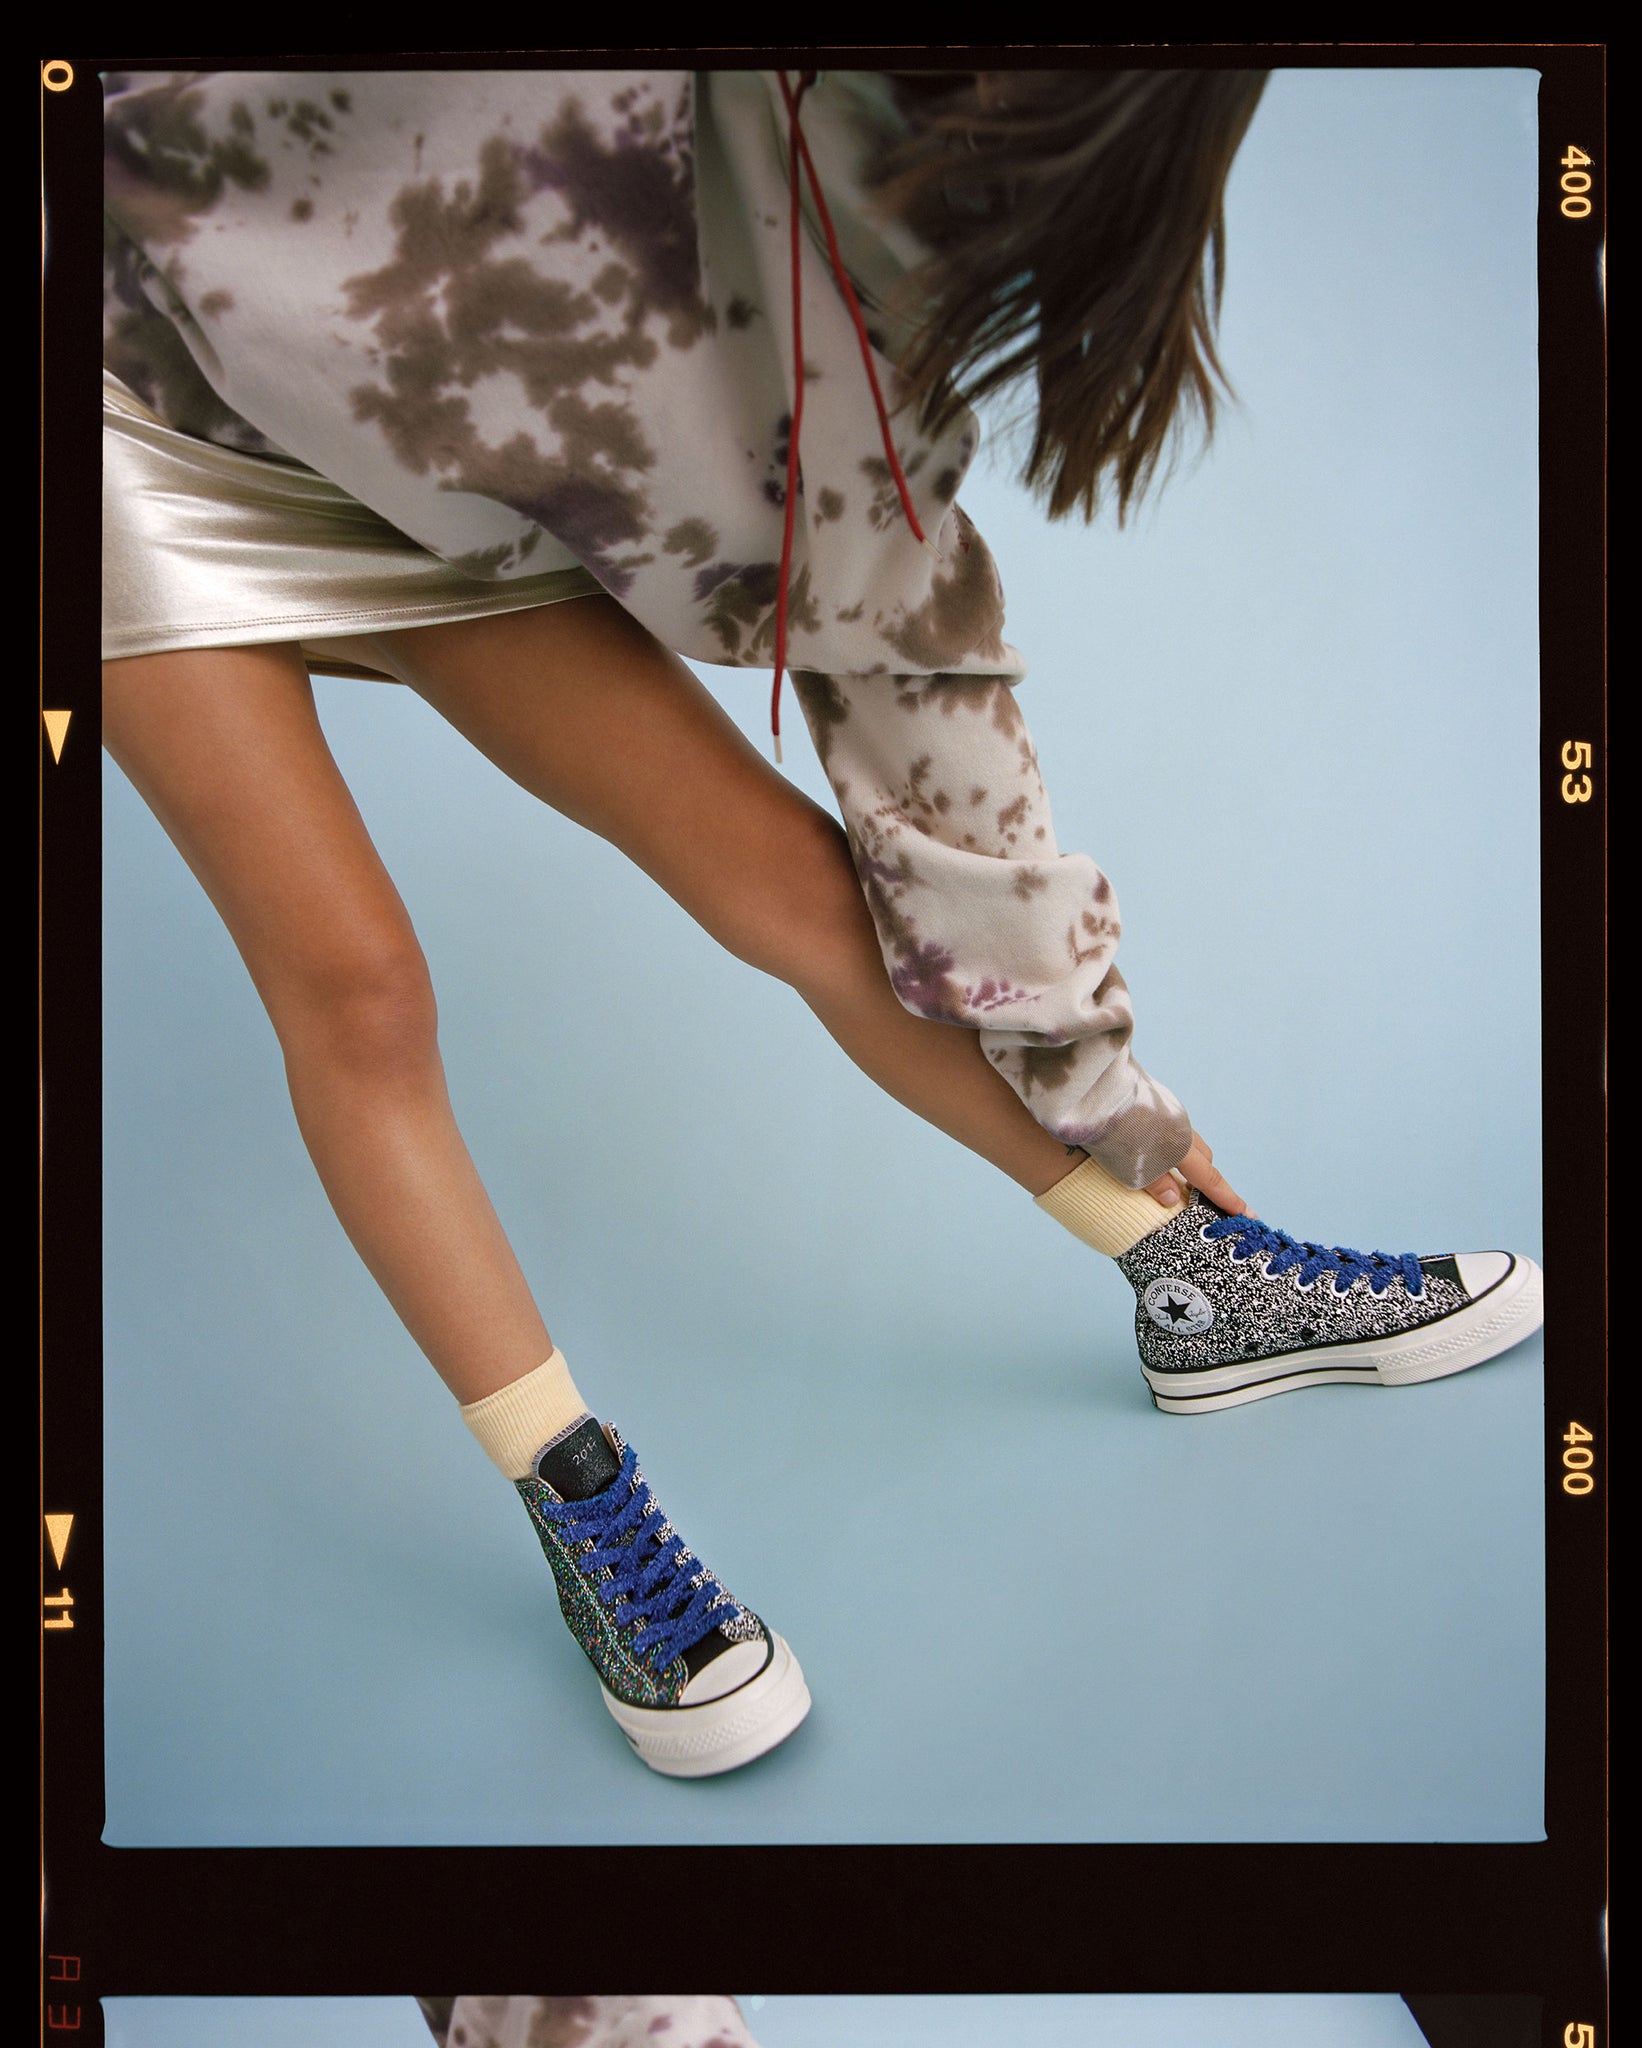 Anderson x Converse With More Glitter Sneakers